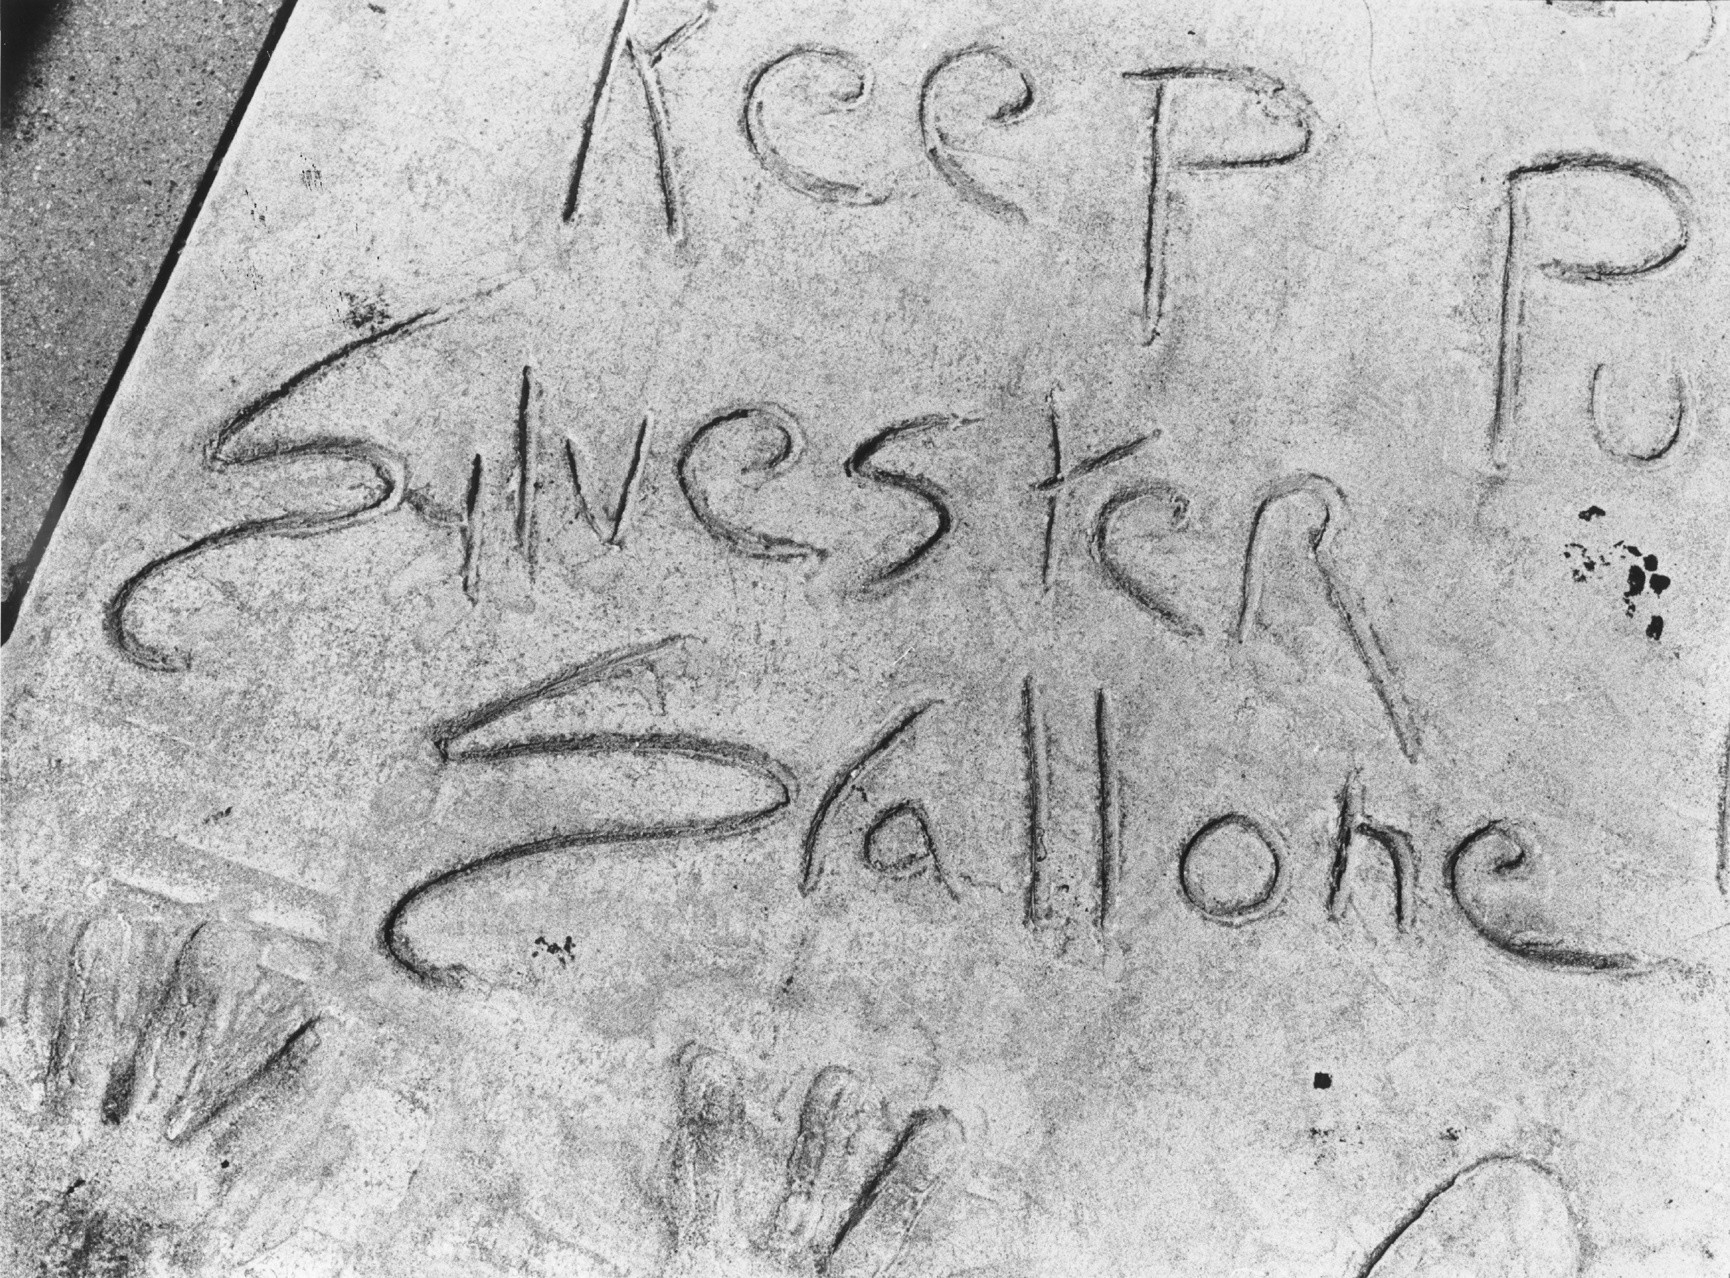 Sylvester Stallone's misspelled named etched in wet concrete in front of Mann's Chinese Theater.